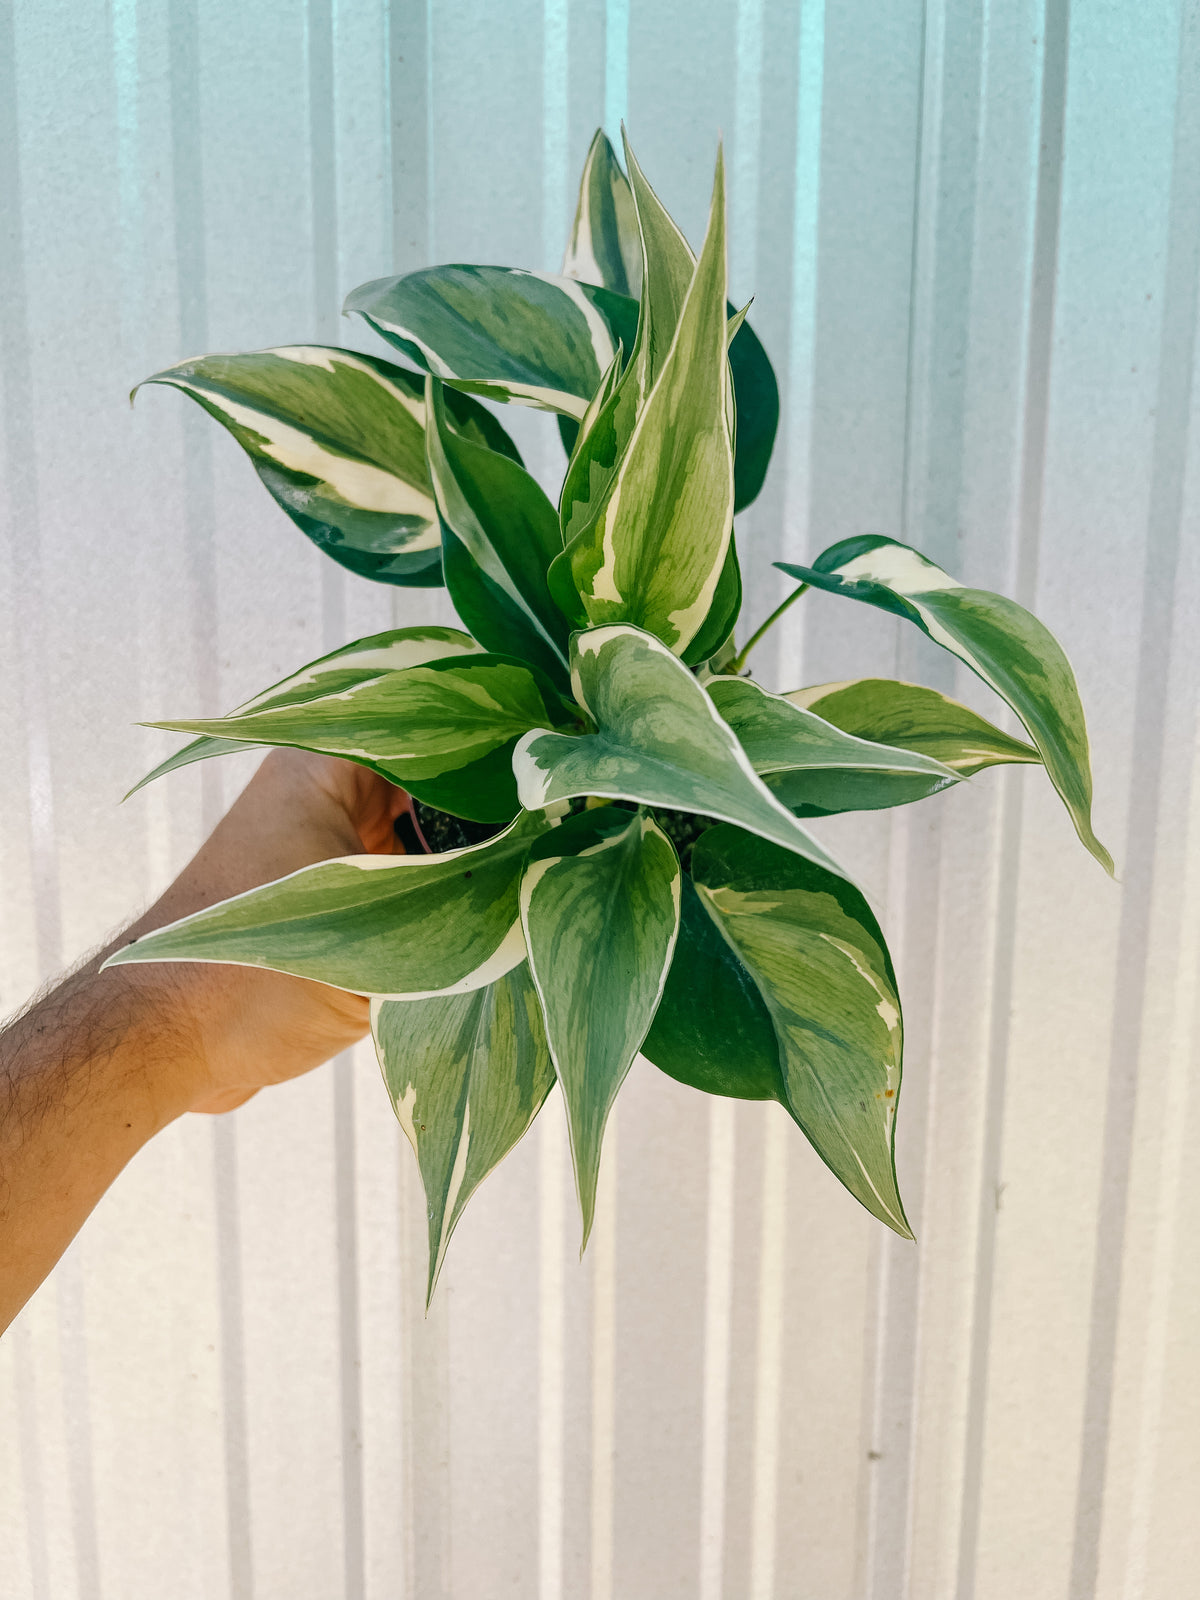 4" Philodendron 'Silver Stripe' (highly variegated)